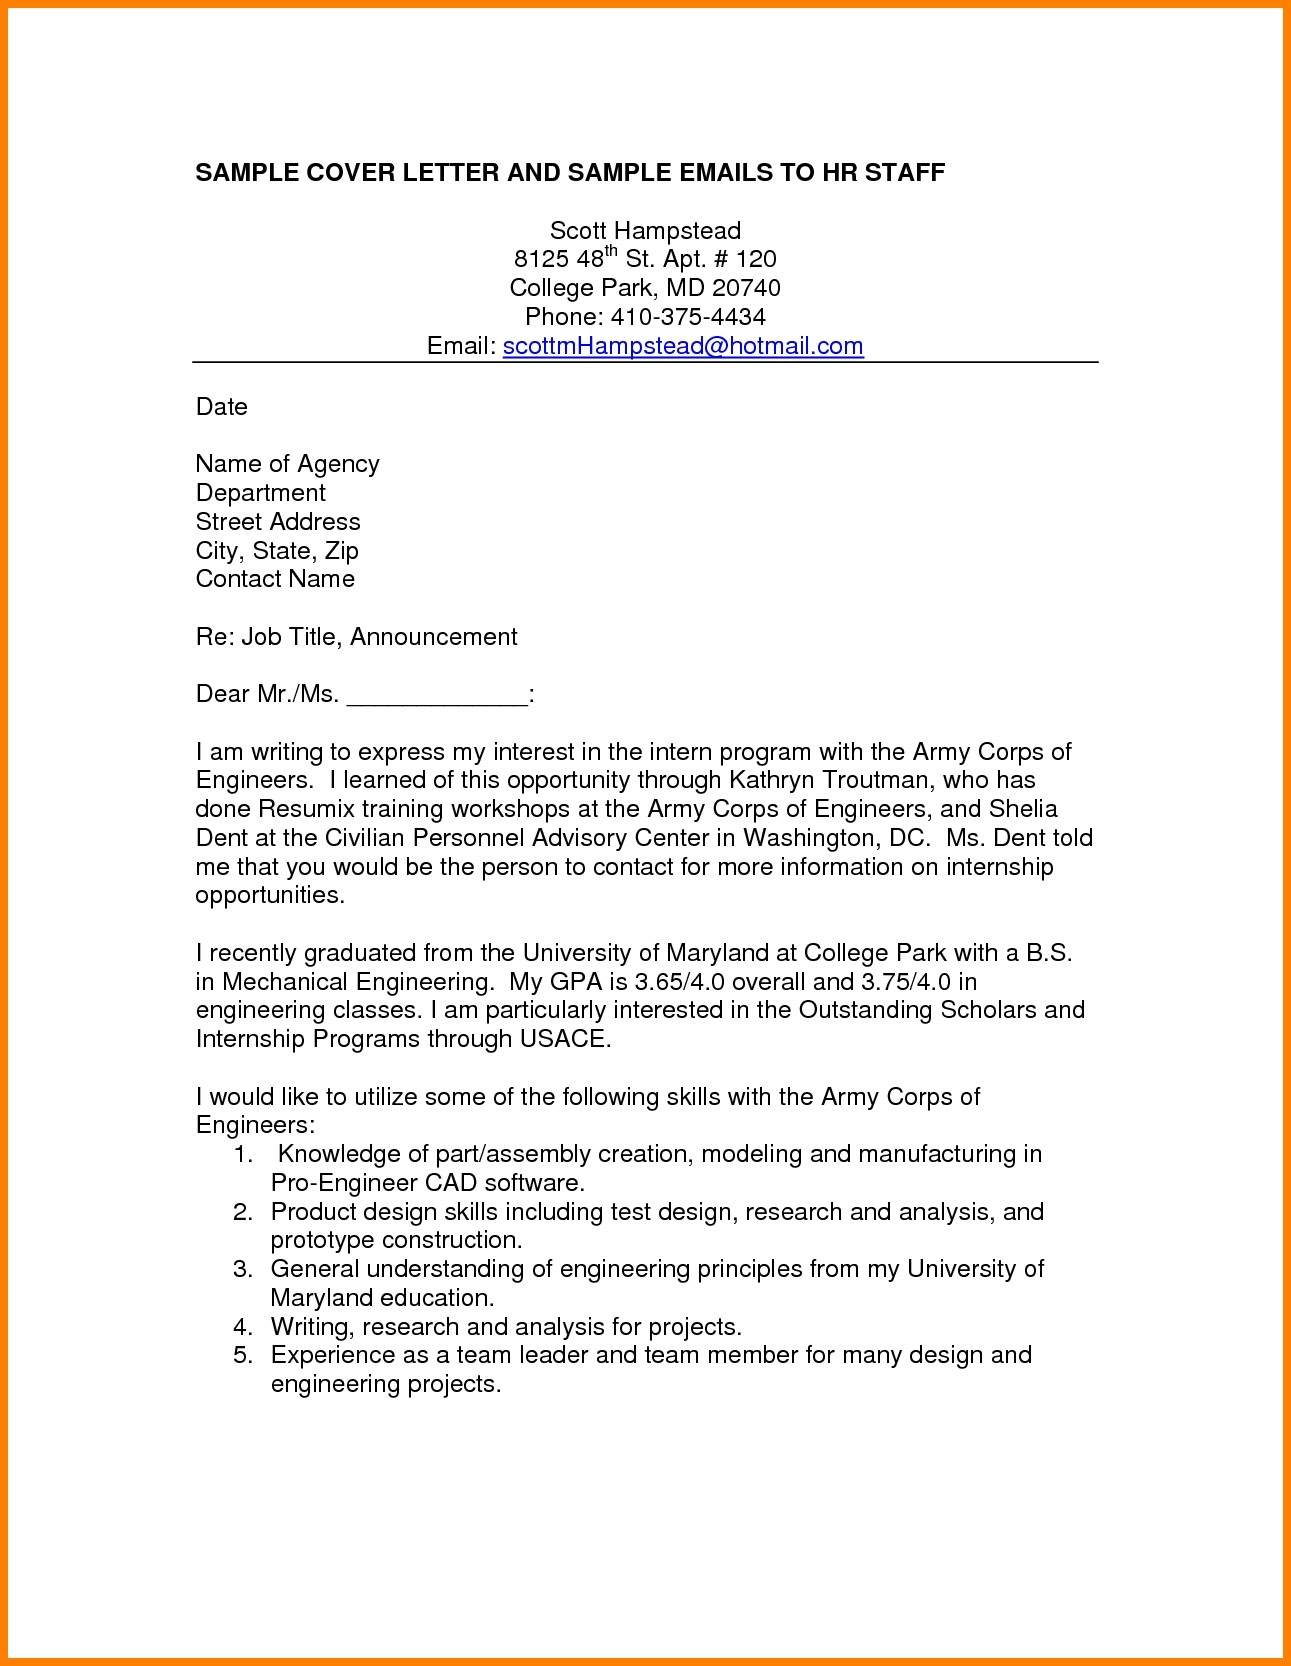 Samples Of Cover Letter  20 When Applying For A Job What Is A Cover Letter New Samples Of